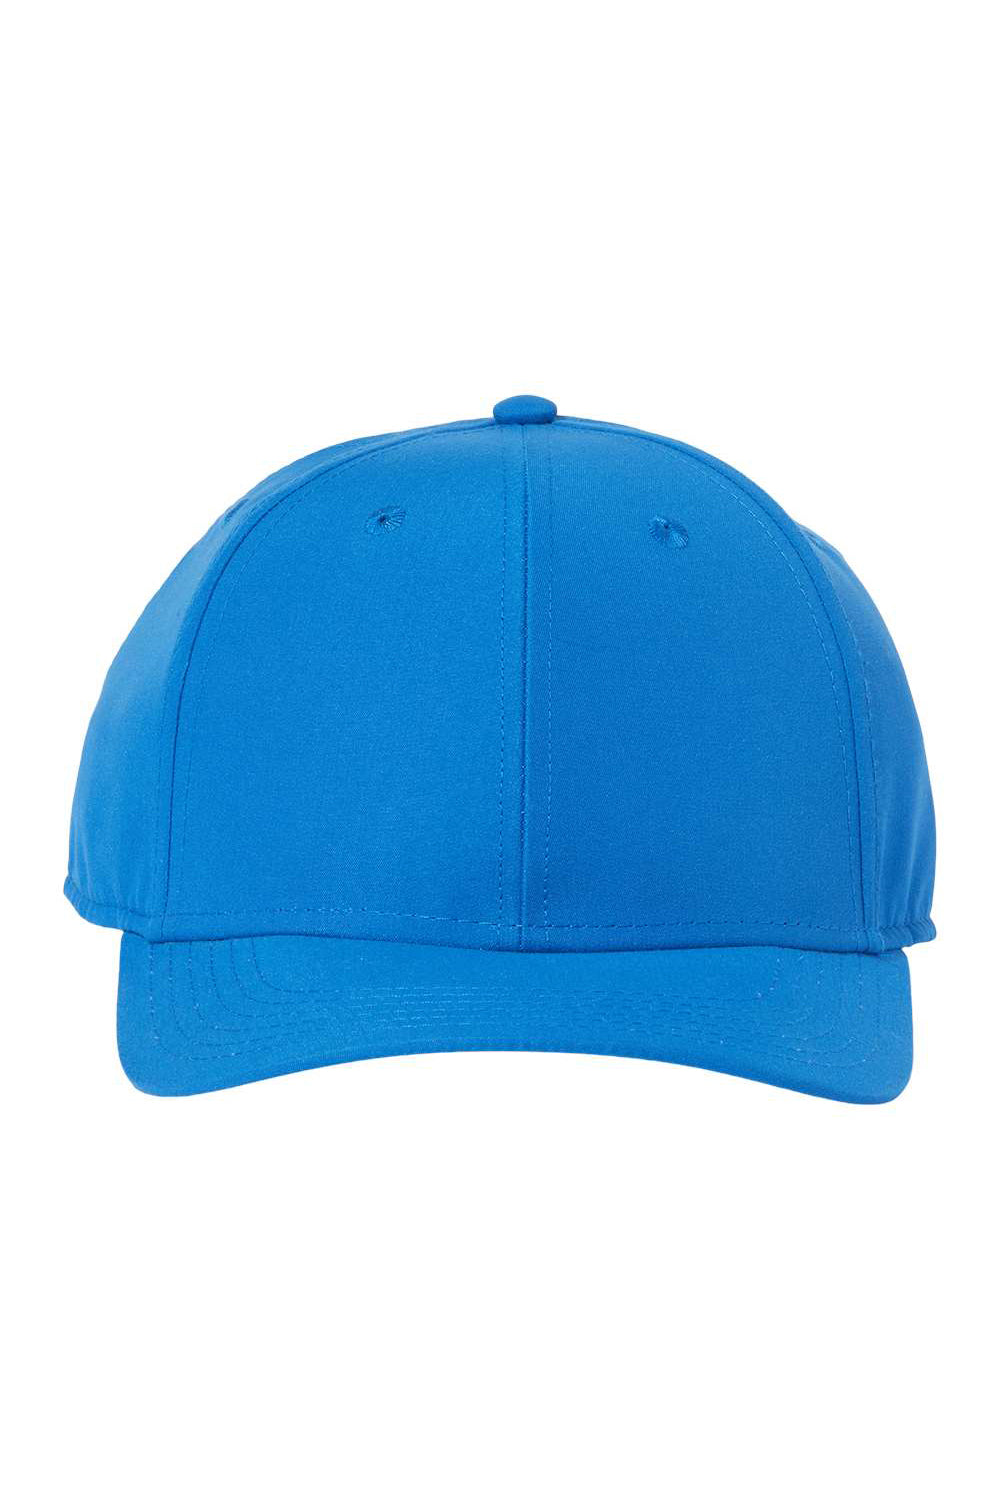 Atlantis Headwear REFE Mens Sustainable Recycled Feel Snapback Hat Royal Blue Flat Front